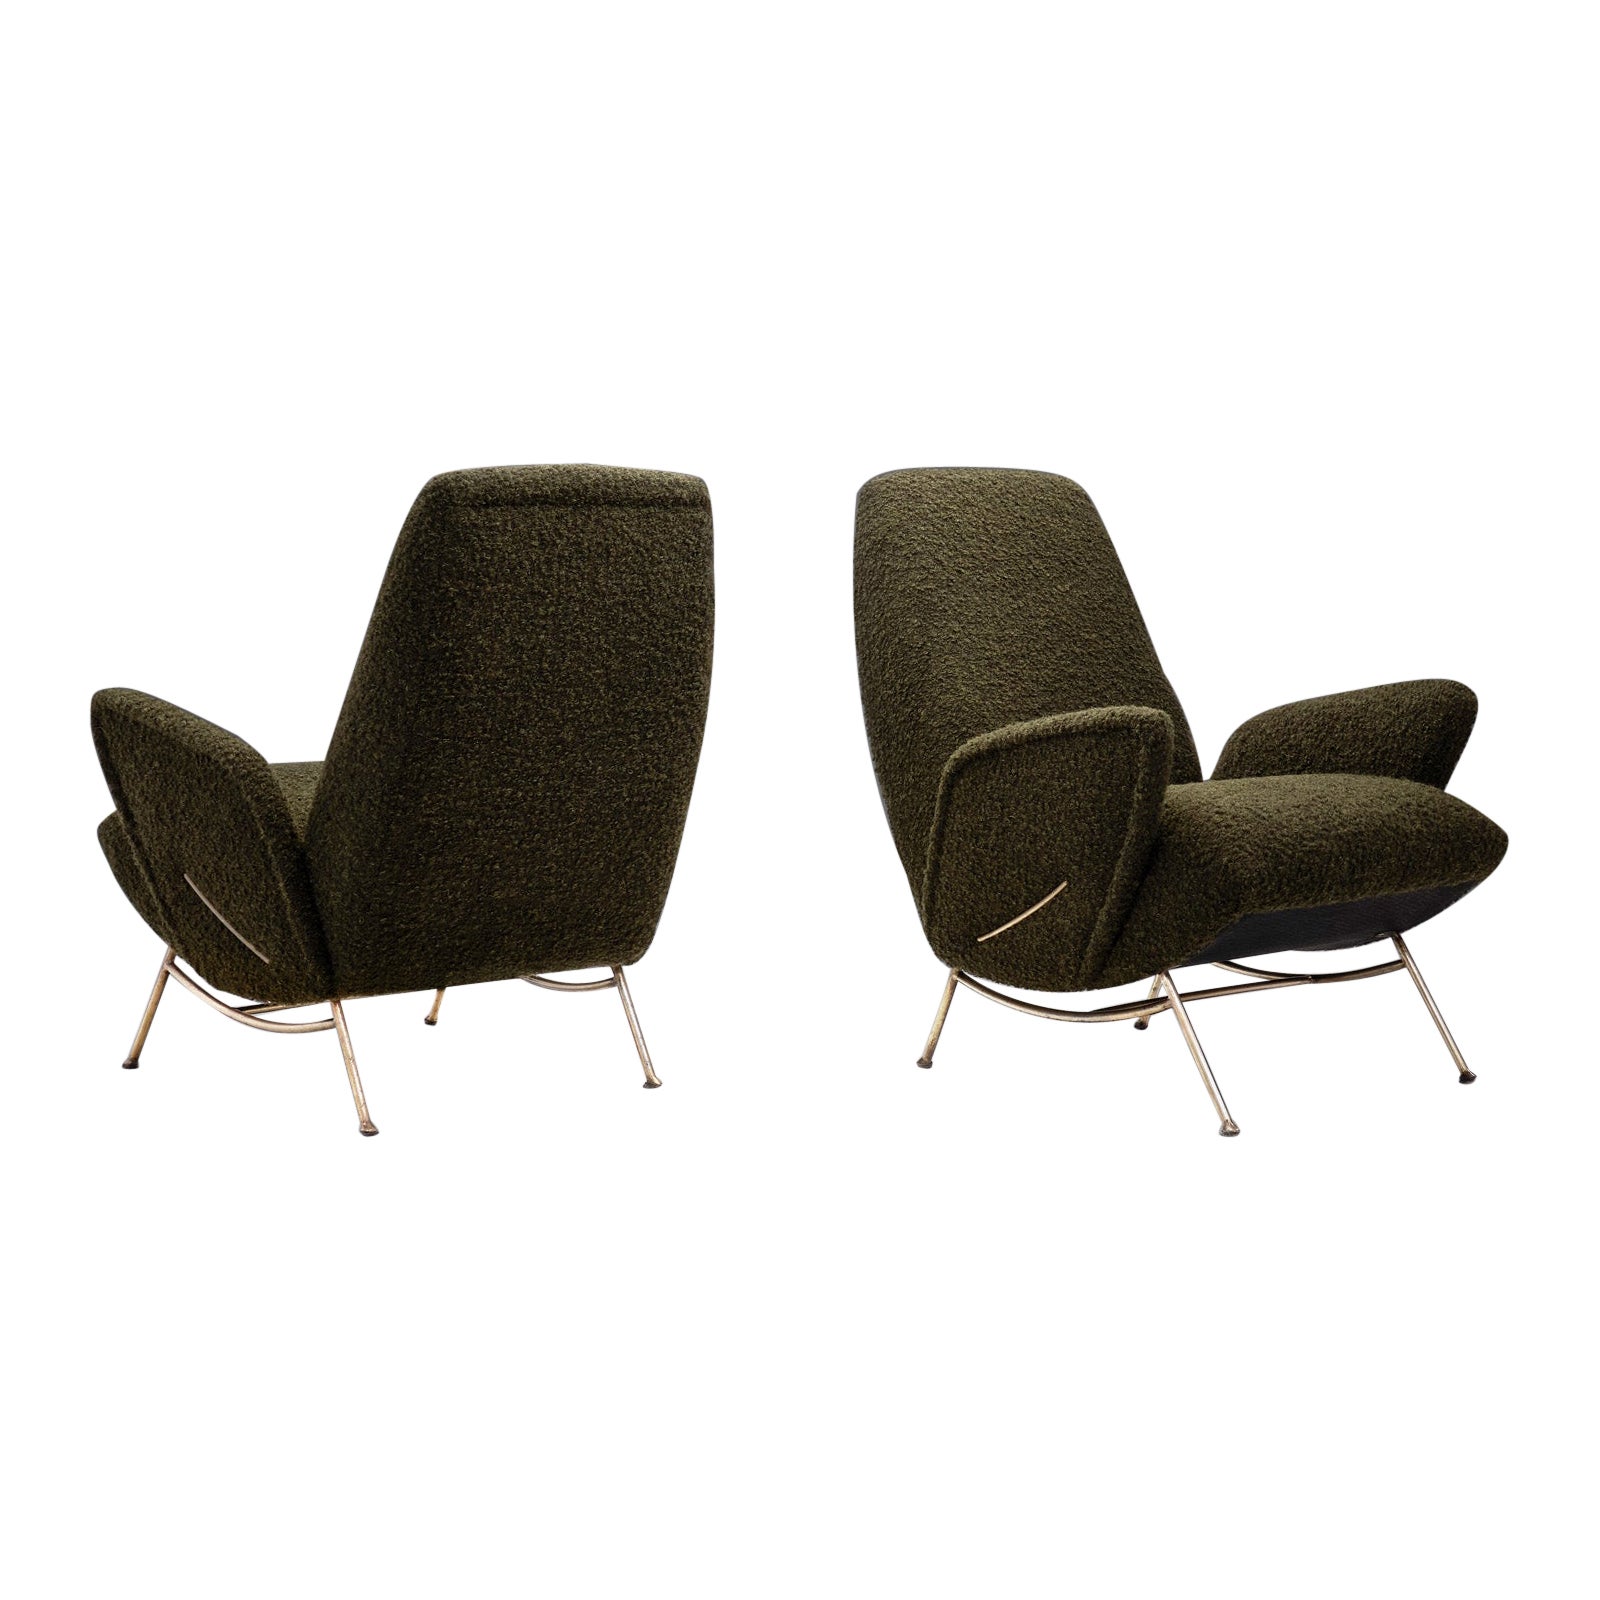 Pair of Midcentury Lounge Chairs with Metal Legs by Nino Zoncada, Italy, 1950s For Sale